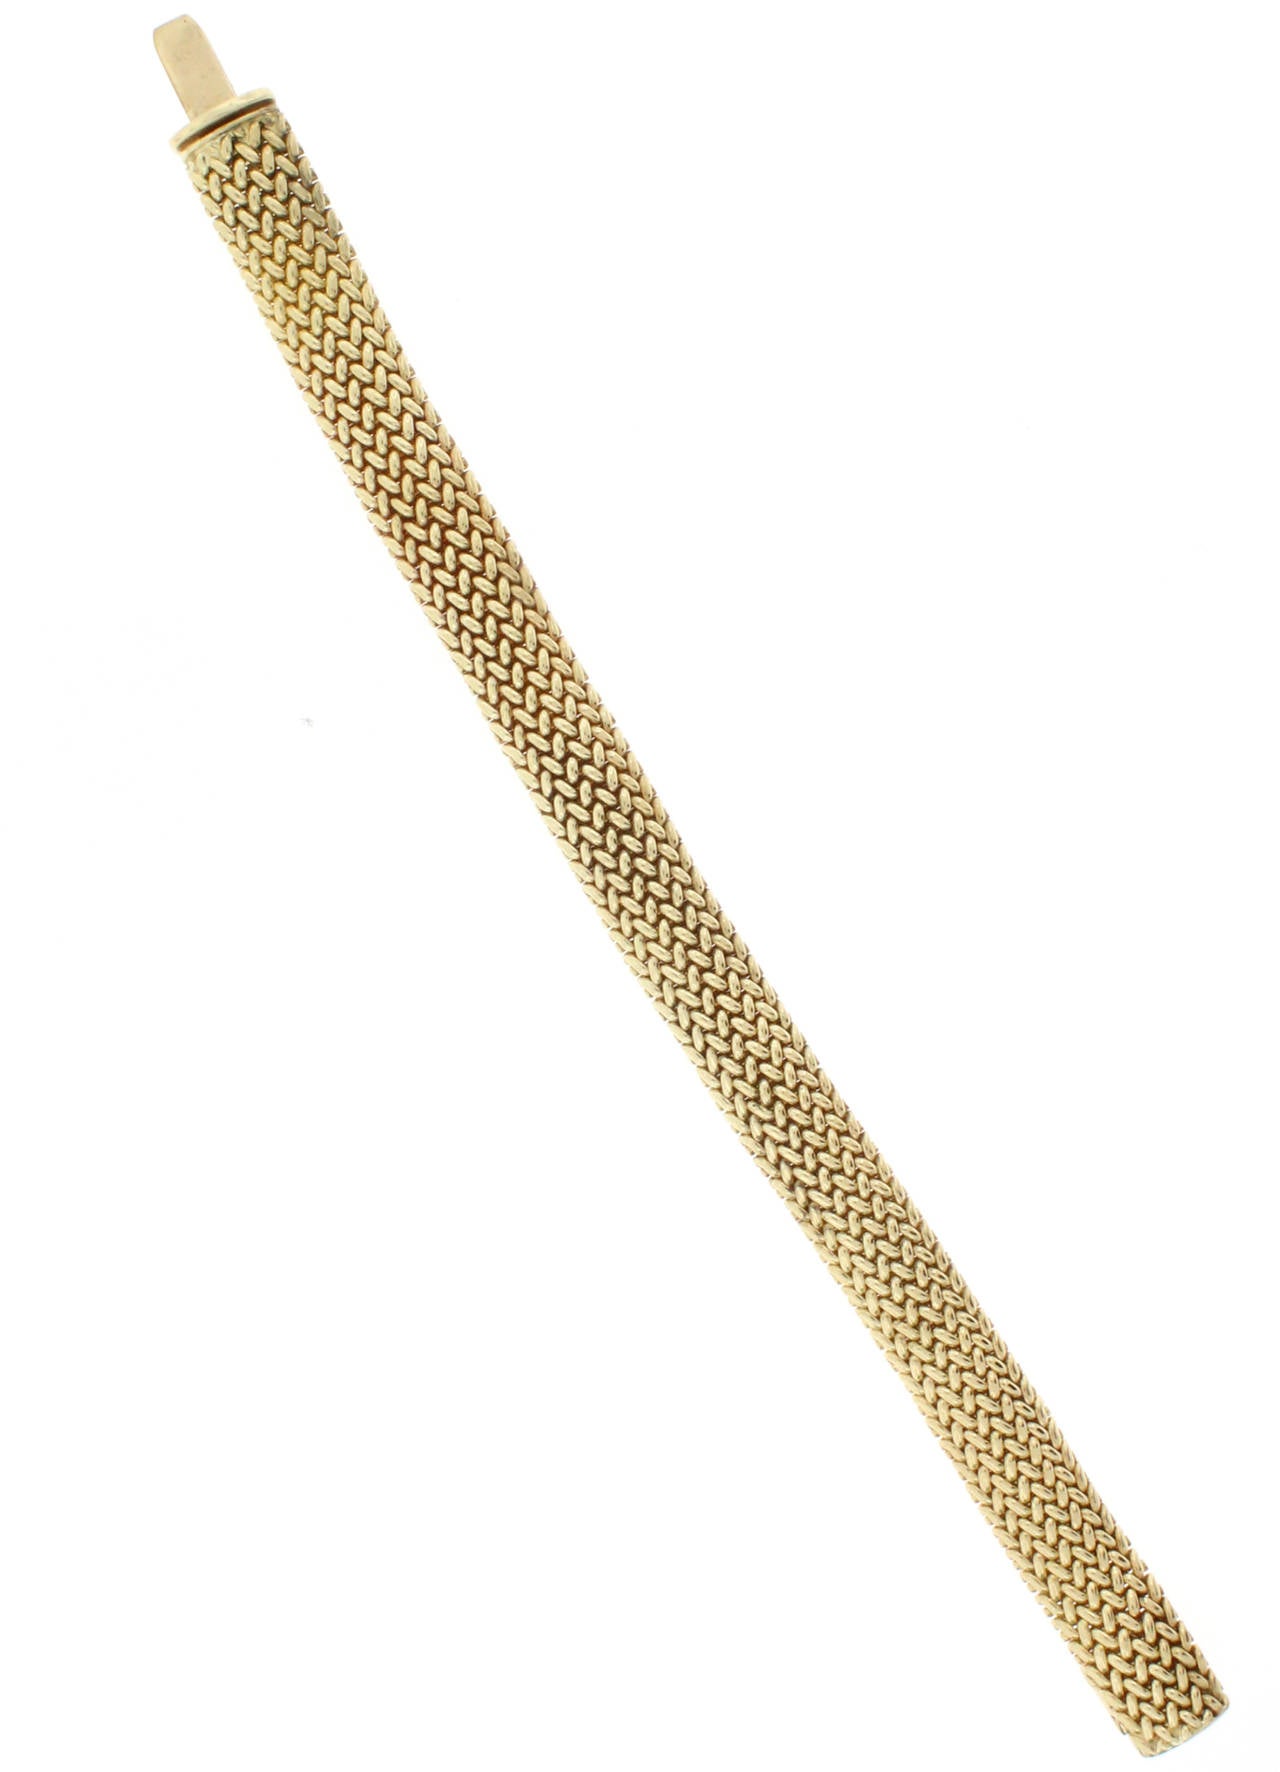 This Tiffany & Co. mesh bracelet is 9.5 millimeters in width and is 18 karat yellow gold.  32 grams